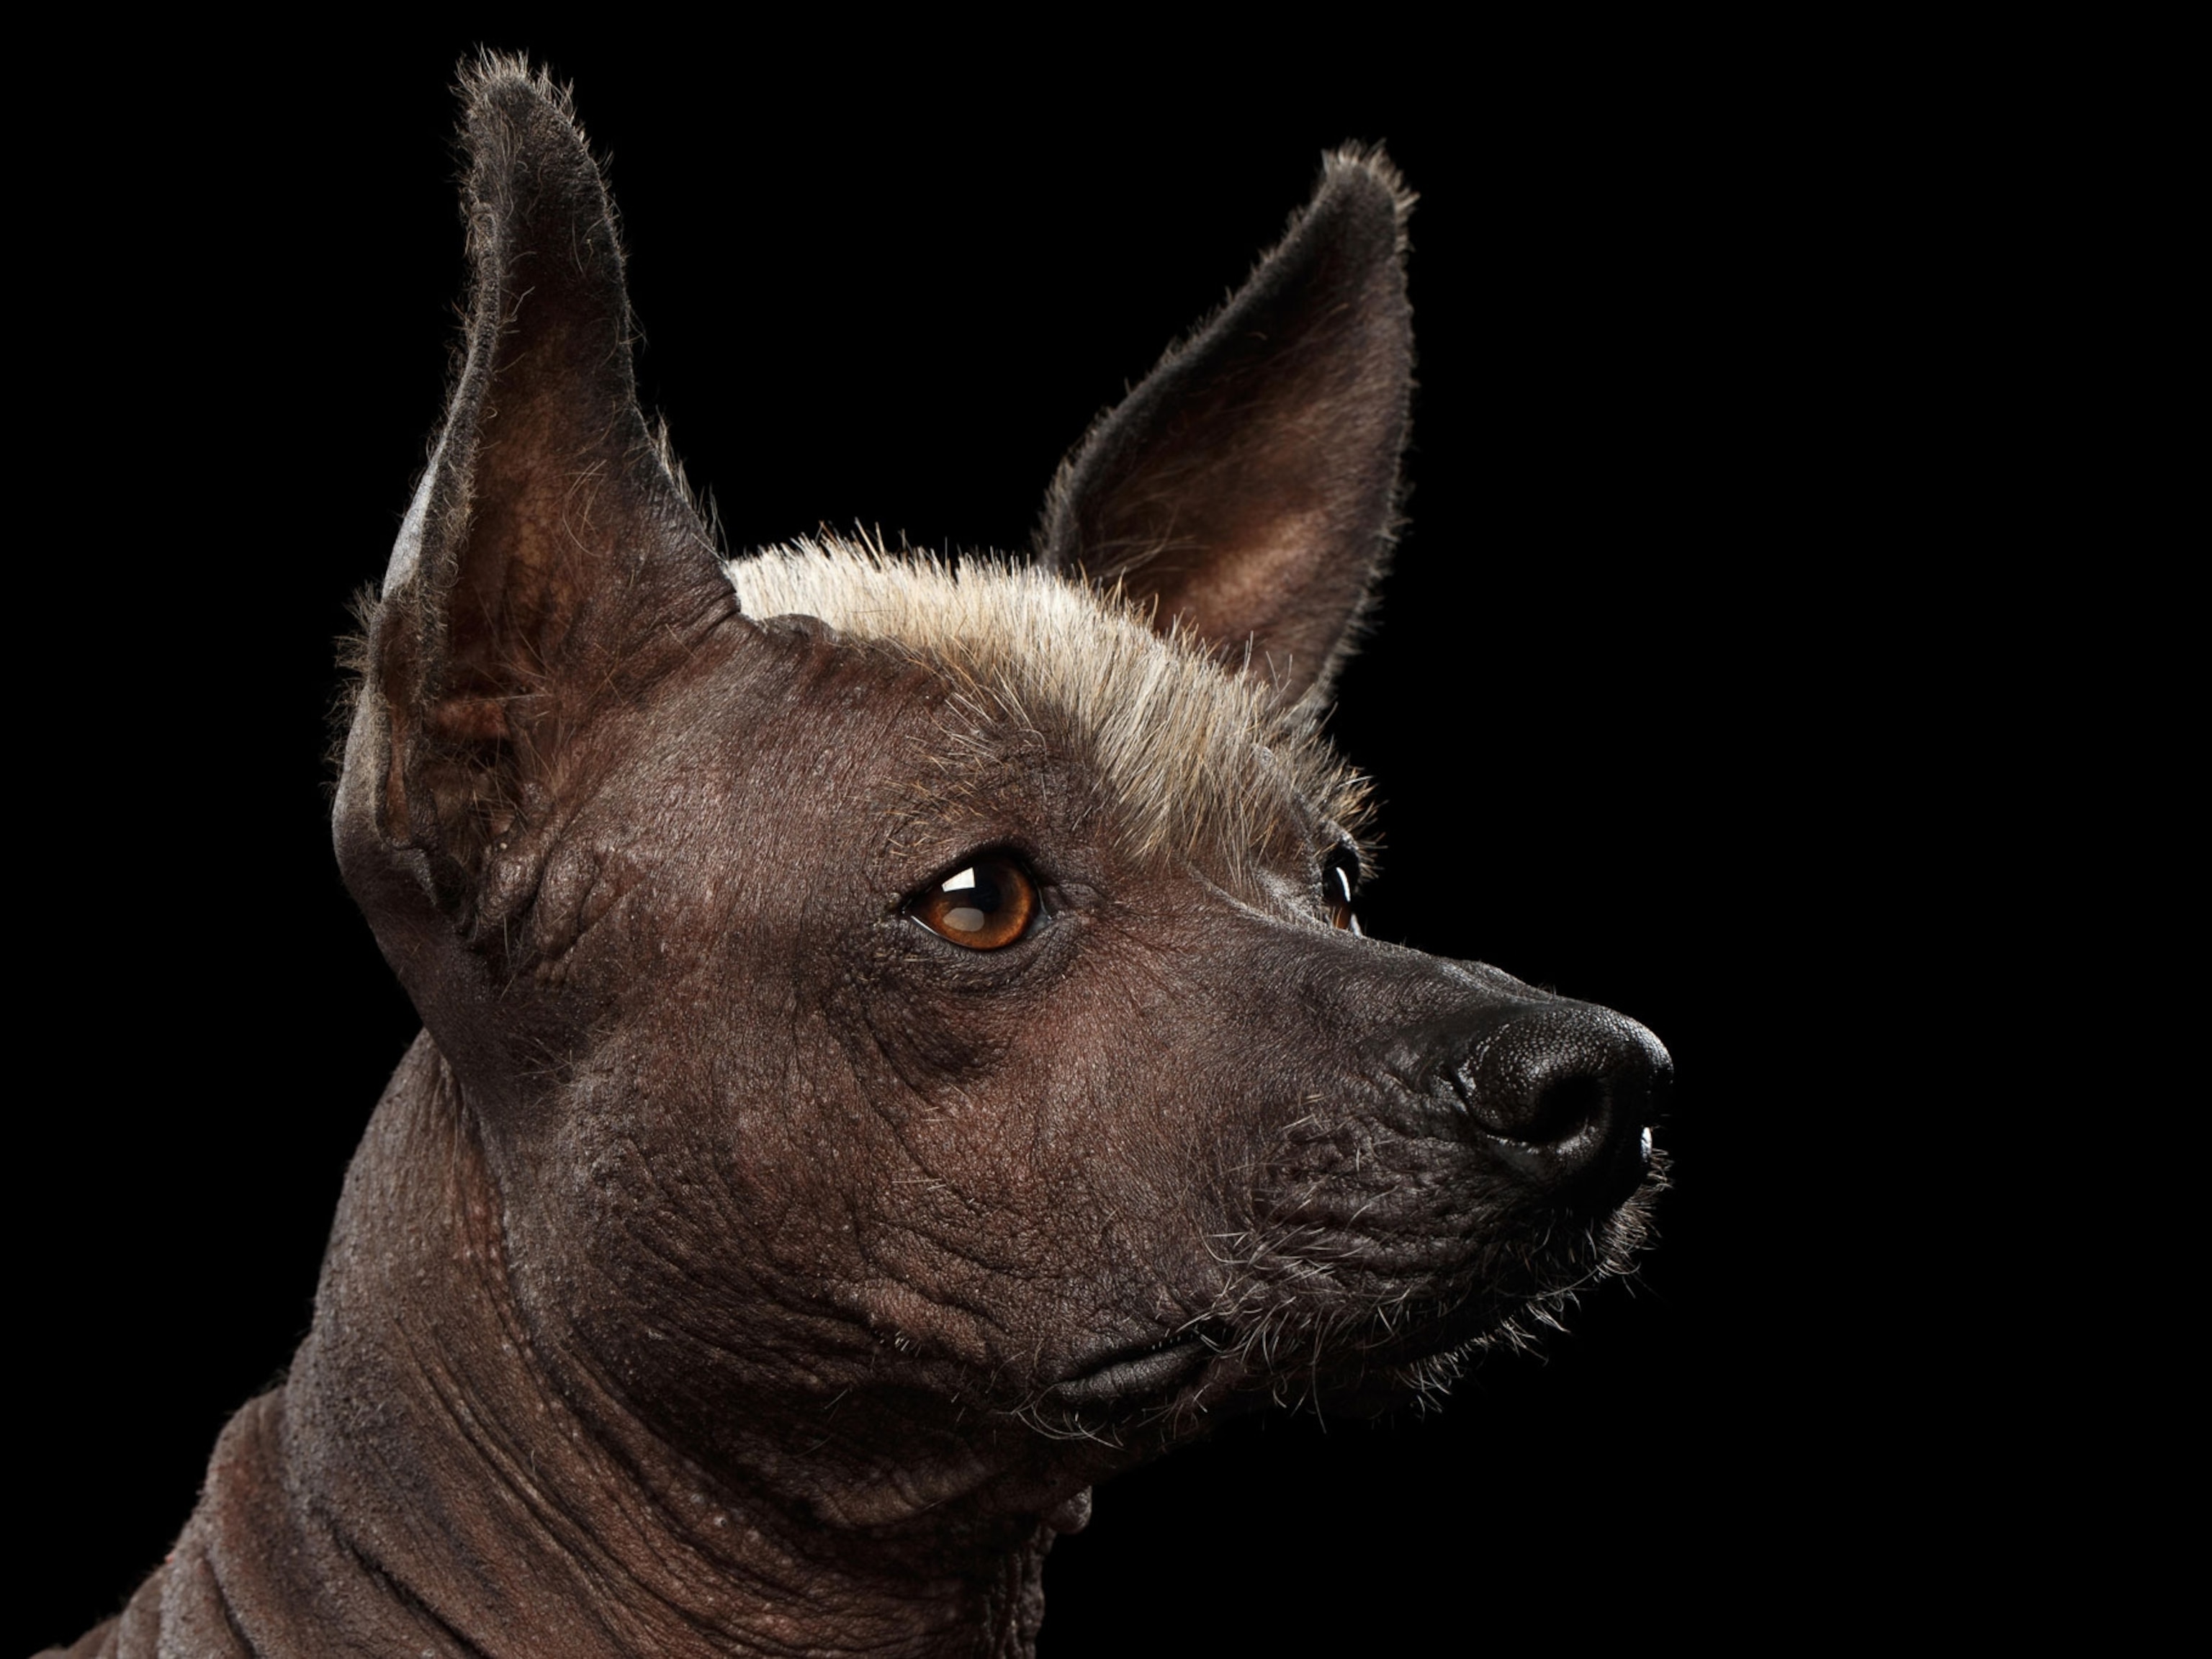 A Mexican hairless dog on a black background